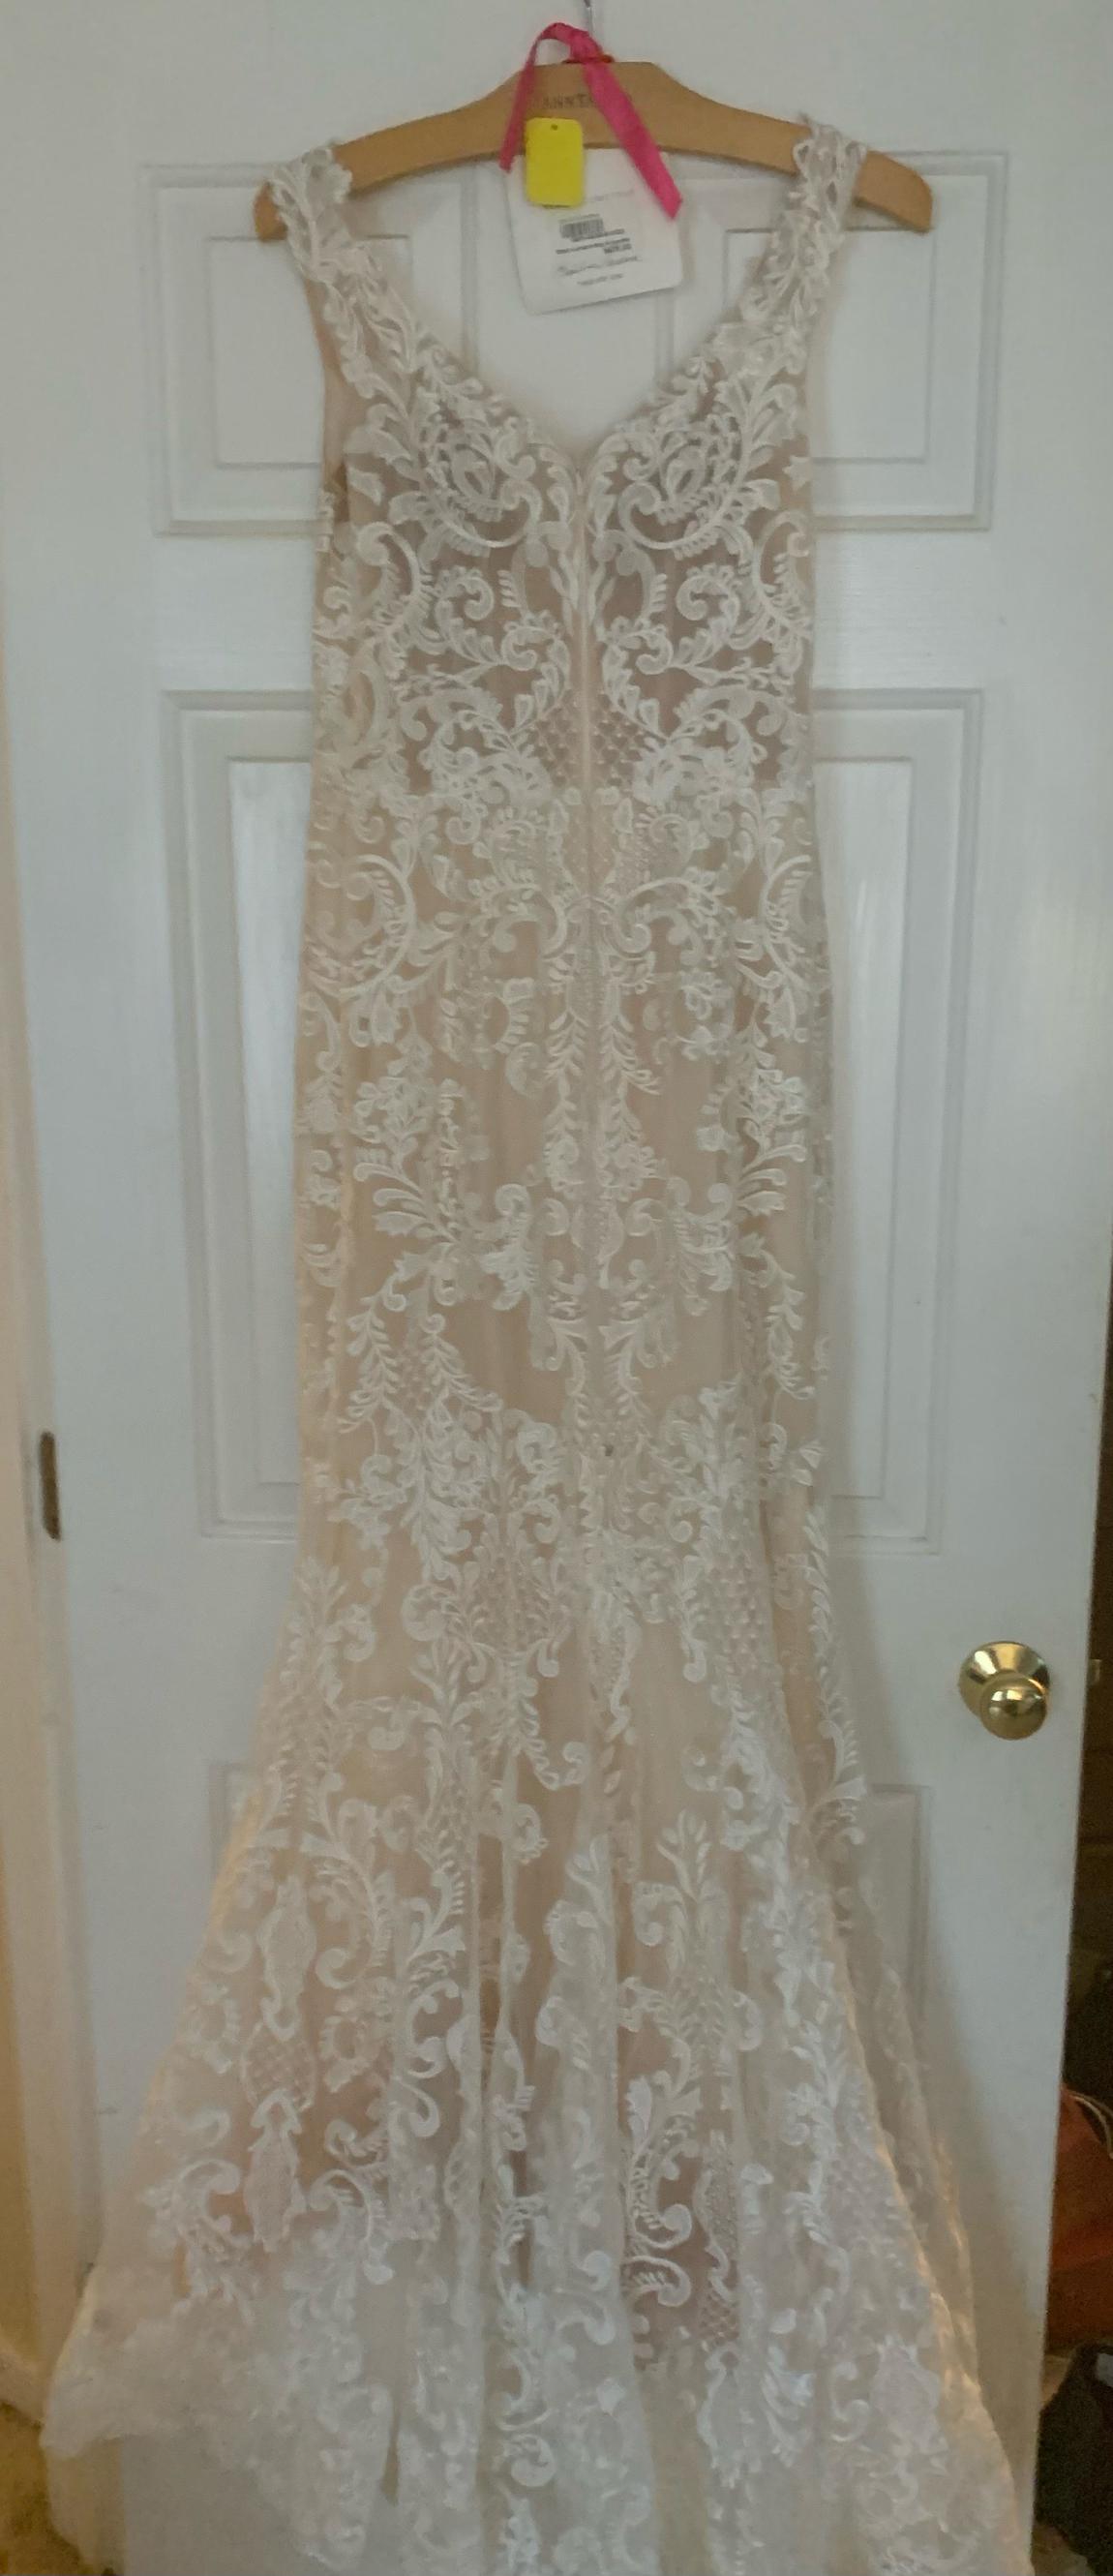 MoriLee - Madeline Gardner Size 6 Lace White Mermaid Dress on Queenly